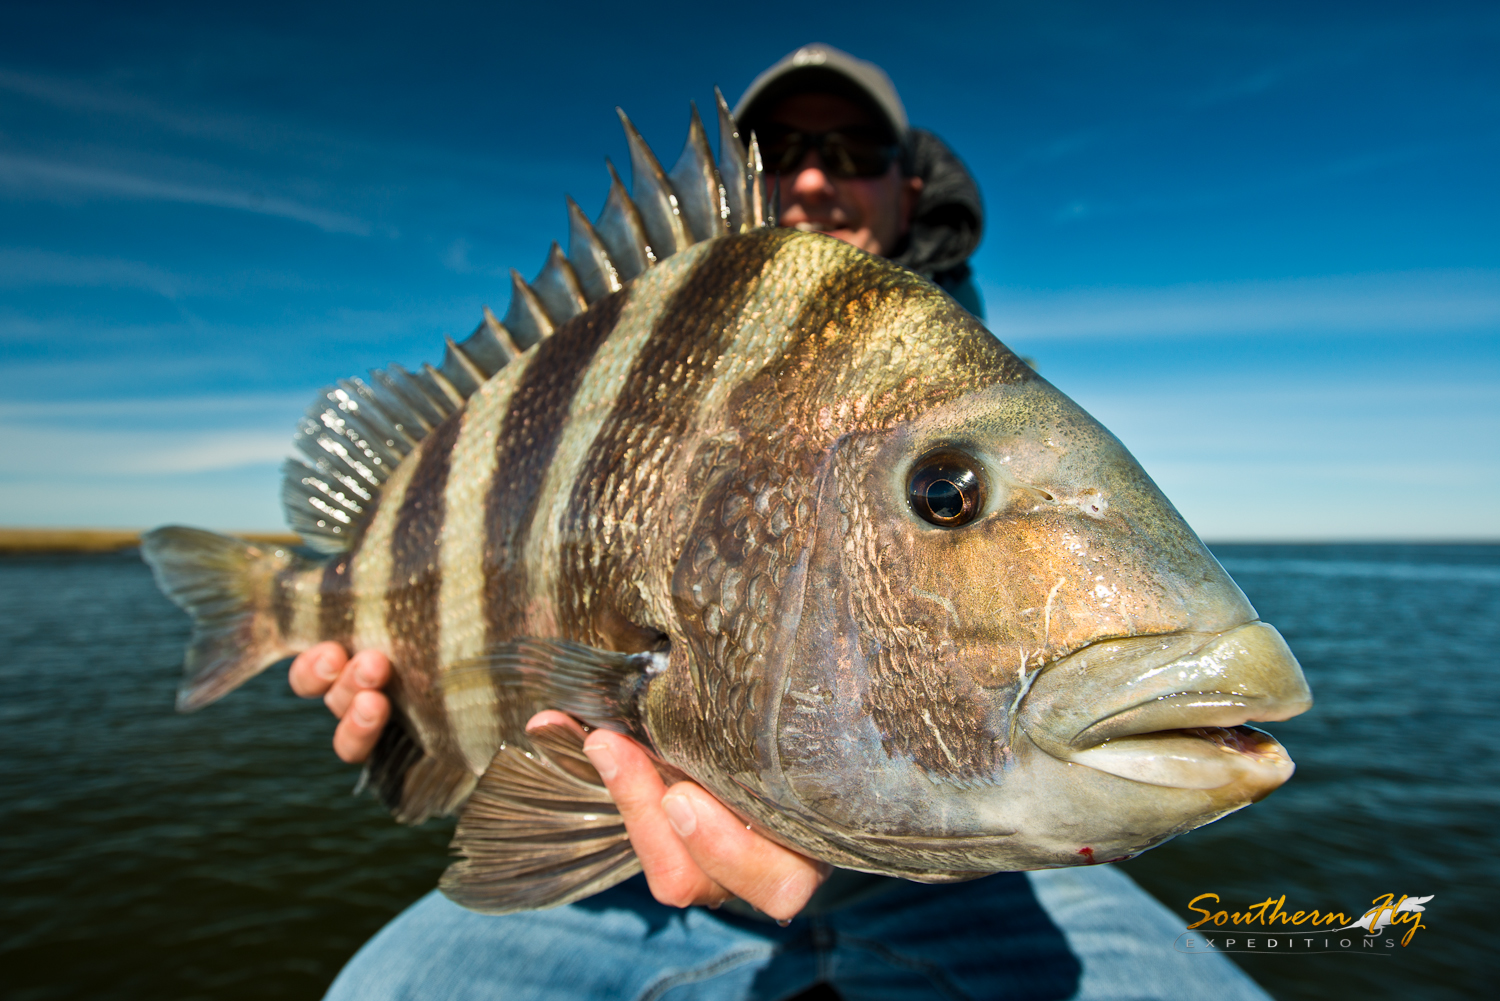 Monster Sheepshead Spin Fishing with Southern Fly Expeditions